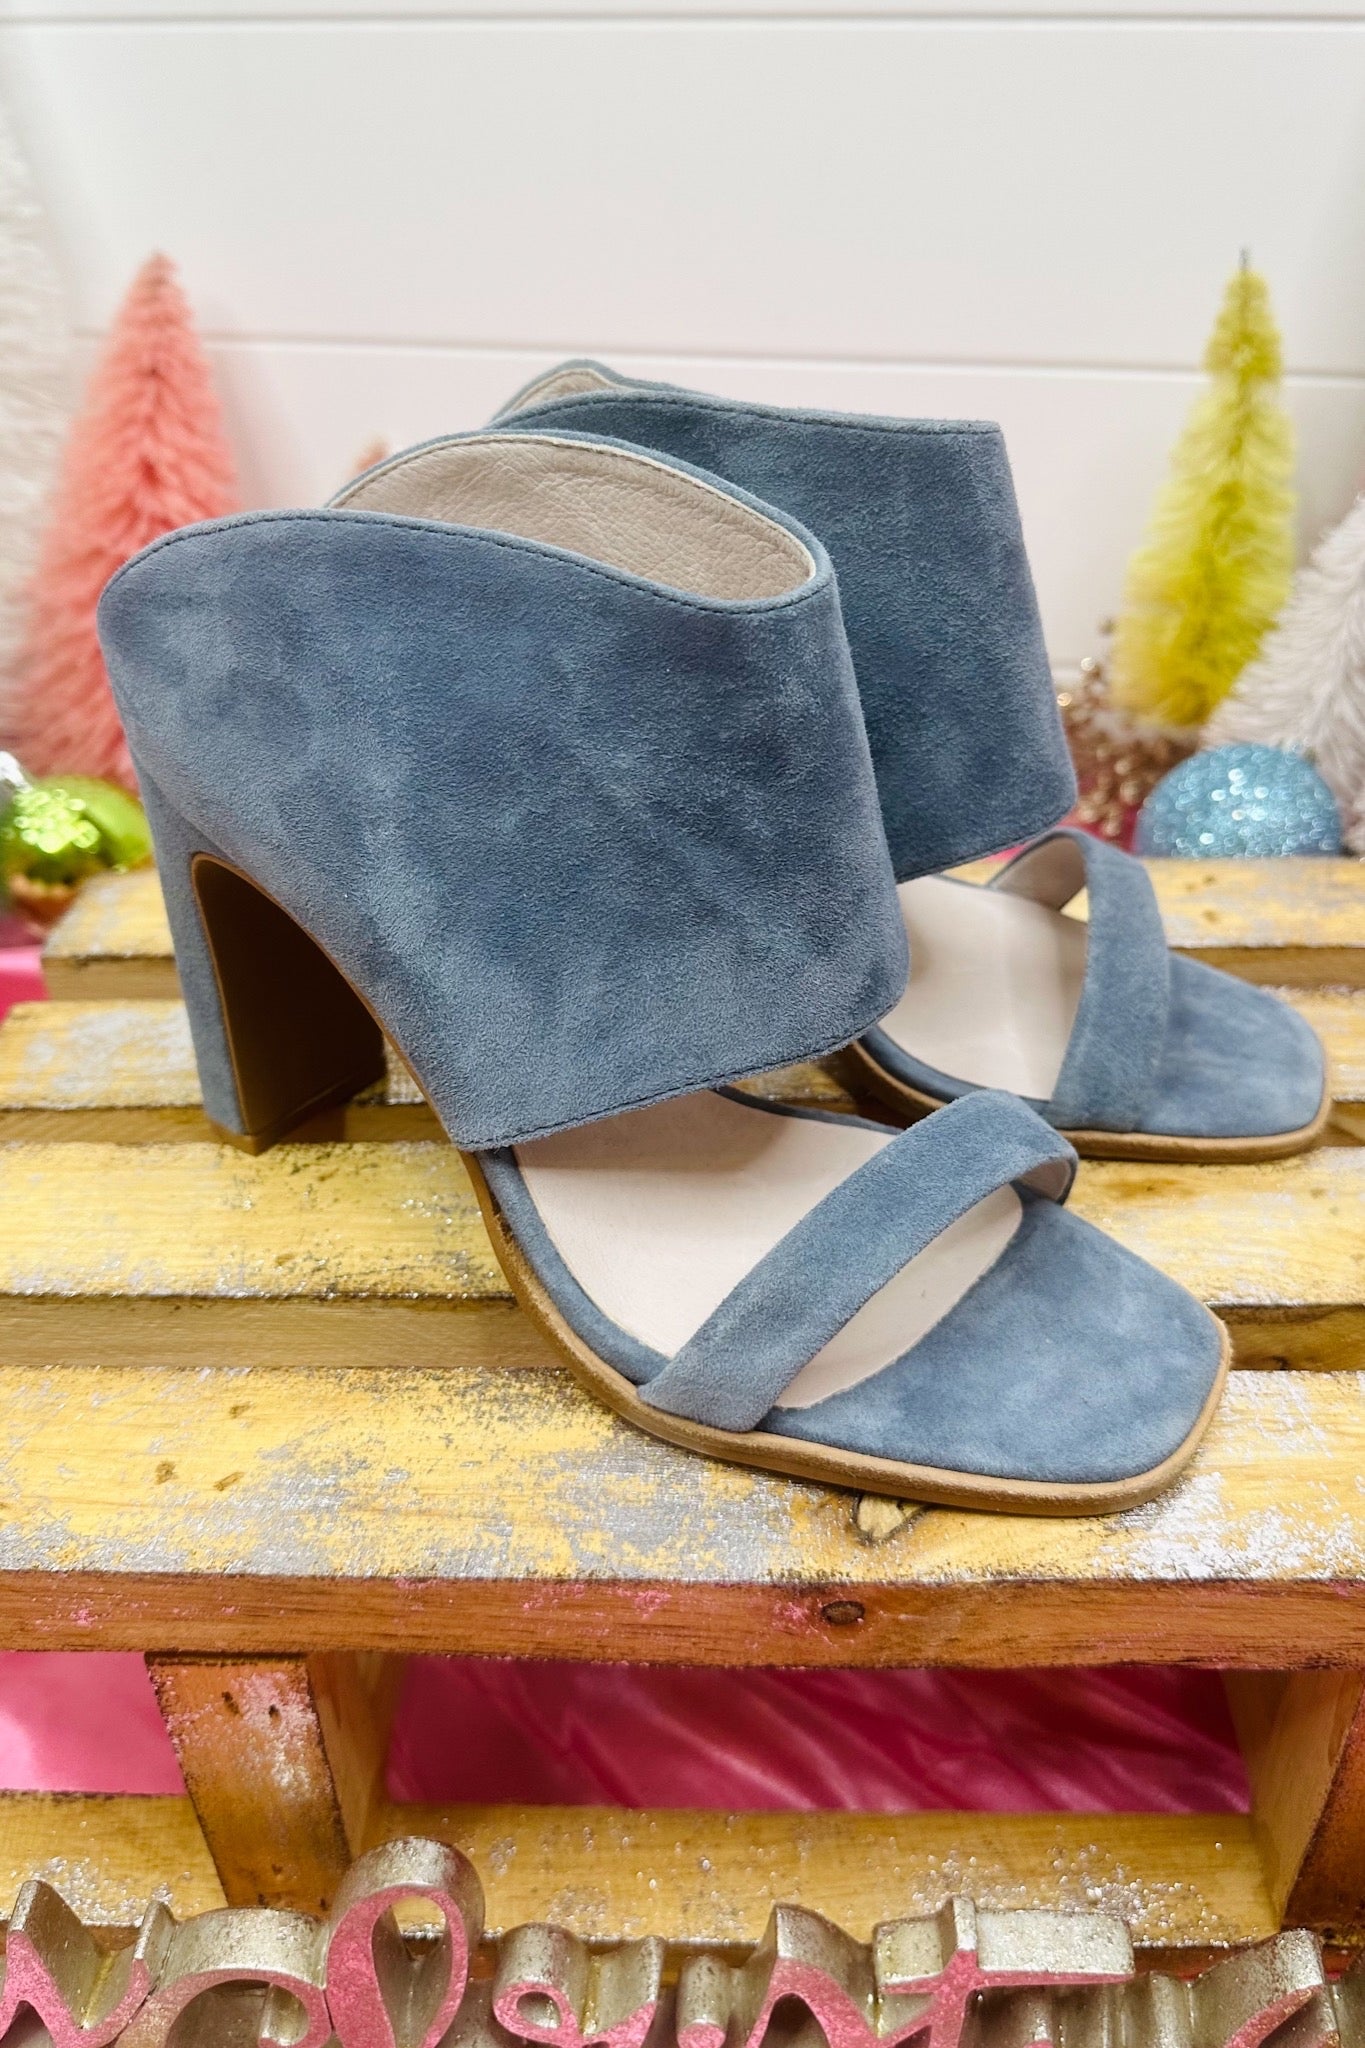 The Linx Kid Suede Heels in Blue by 42 Gold